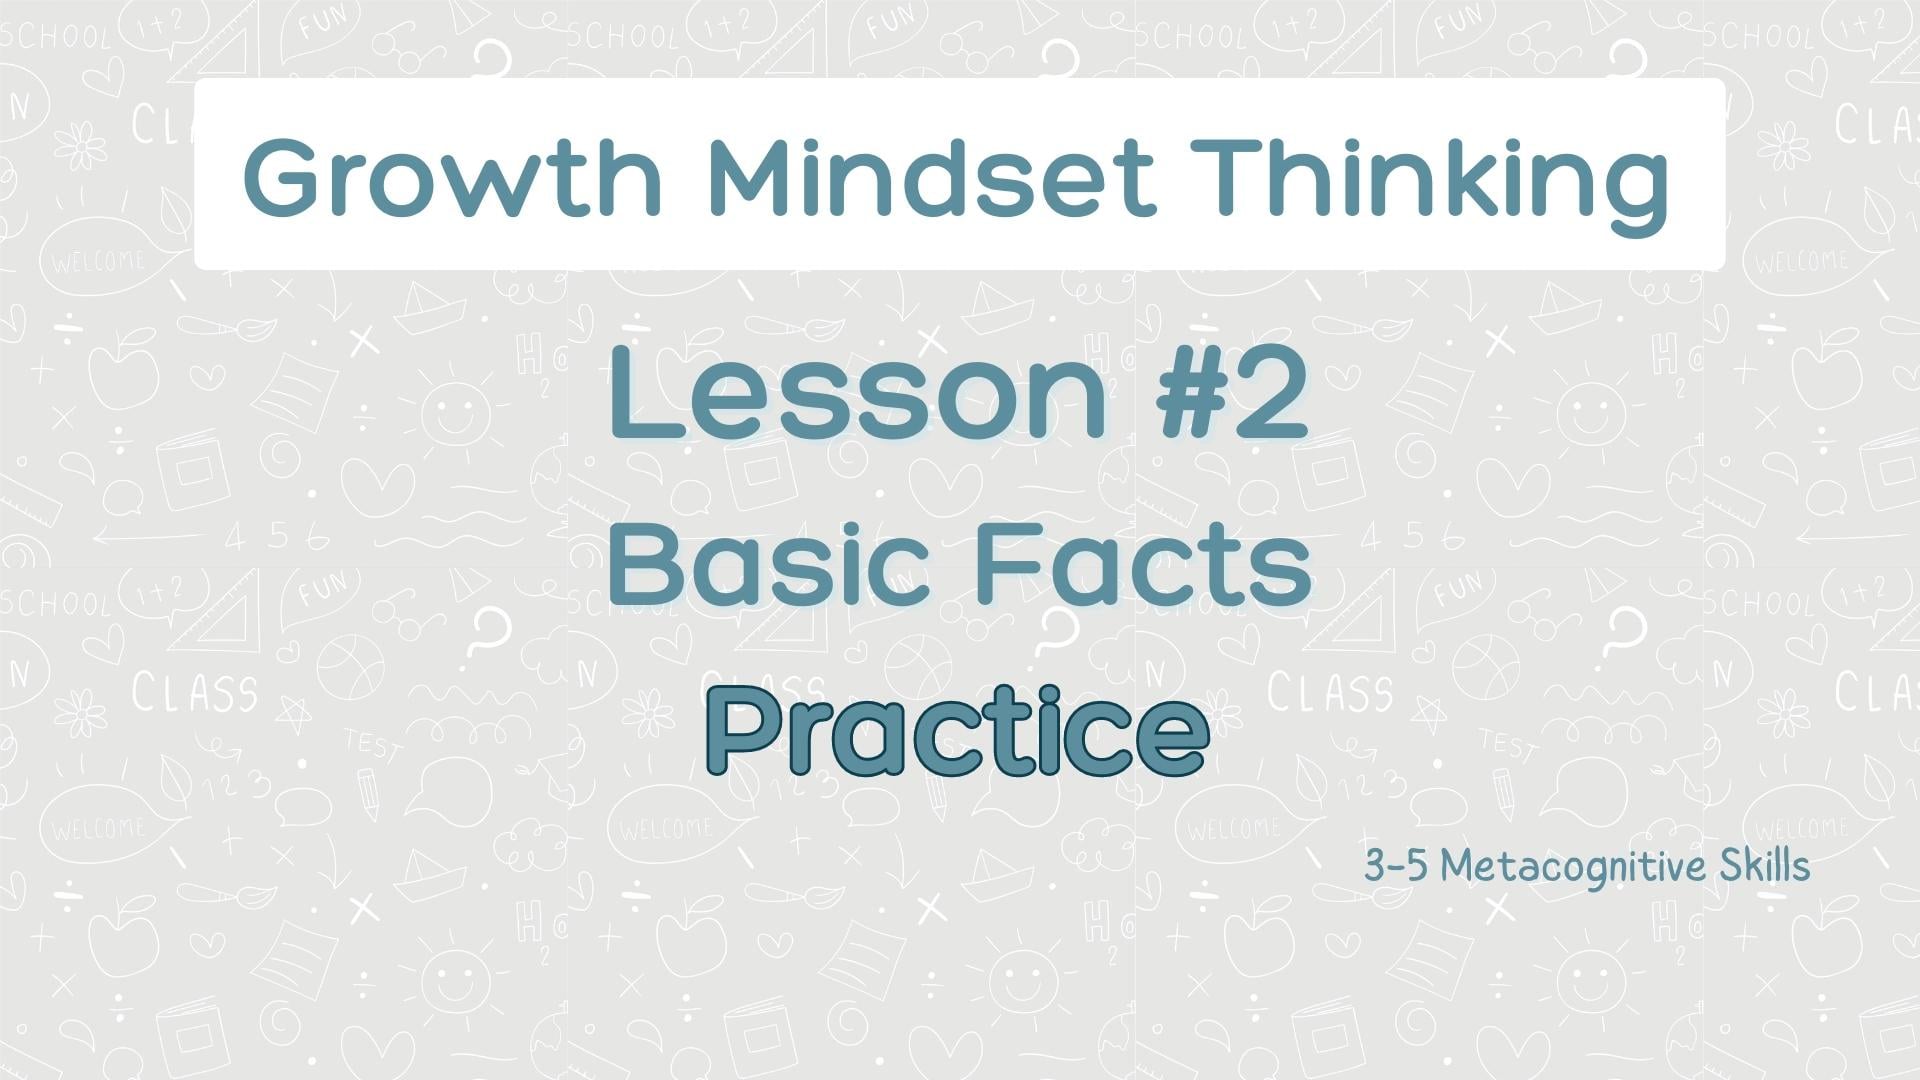 Lesson #2 Basic Facts Practice video thumbnail